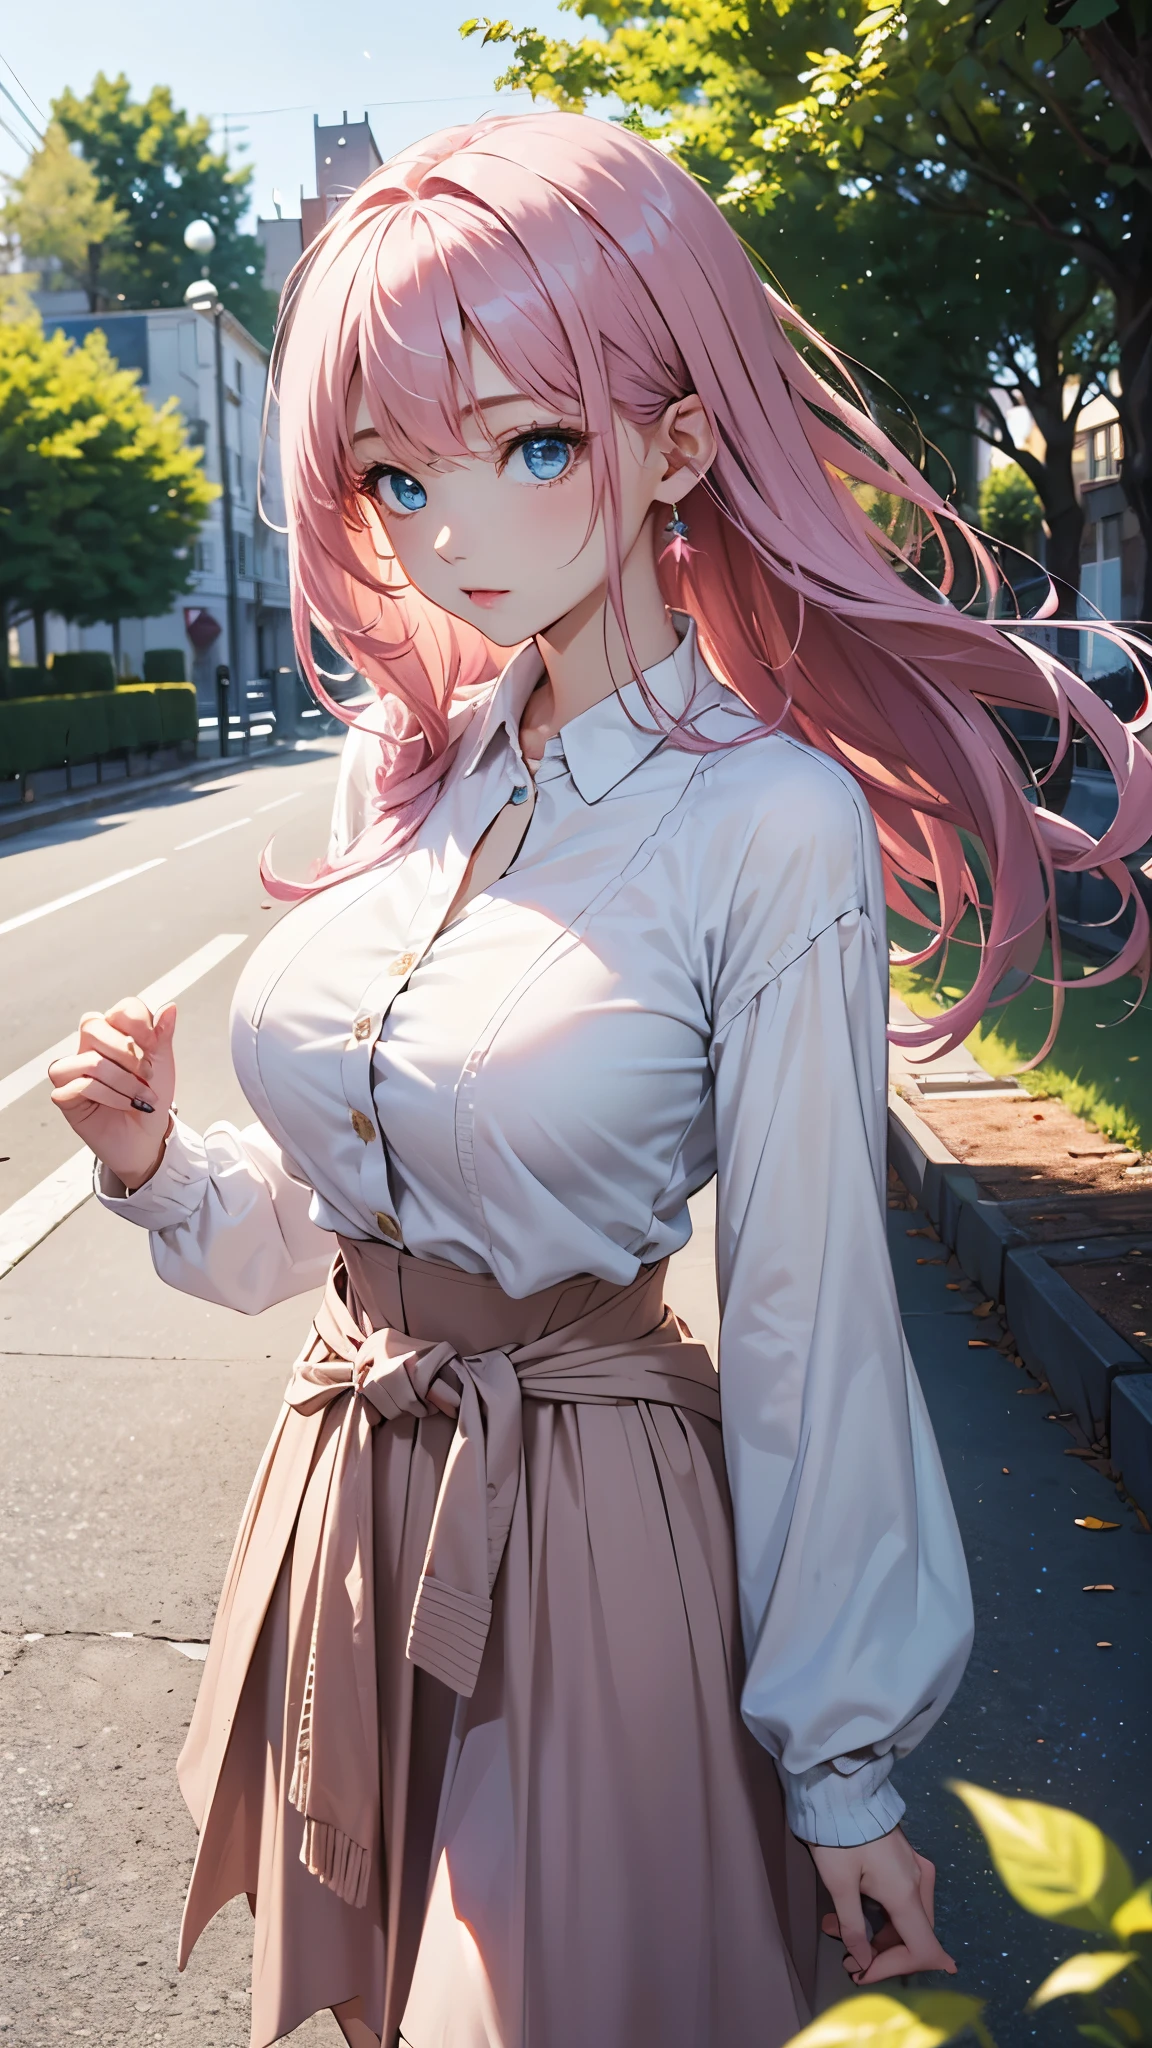 1 female、26 years old、pink hair、long hair fluttering in the wind、(very cute woman)、(Refreshing look)、Natural tree-lined avenues、white blouse、light yellow cardigan、pale pink long skirt、blue eyes、sparkling eyes、big bust、((from waist to head))、(transparent)、(pure)、aerial perspective、